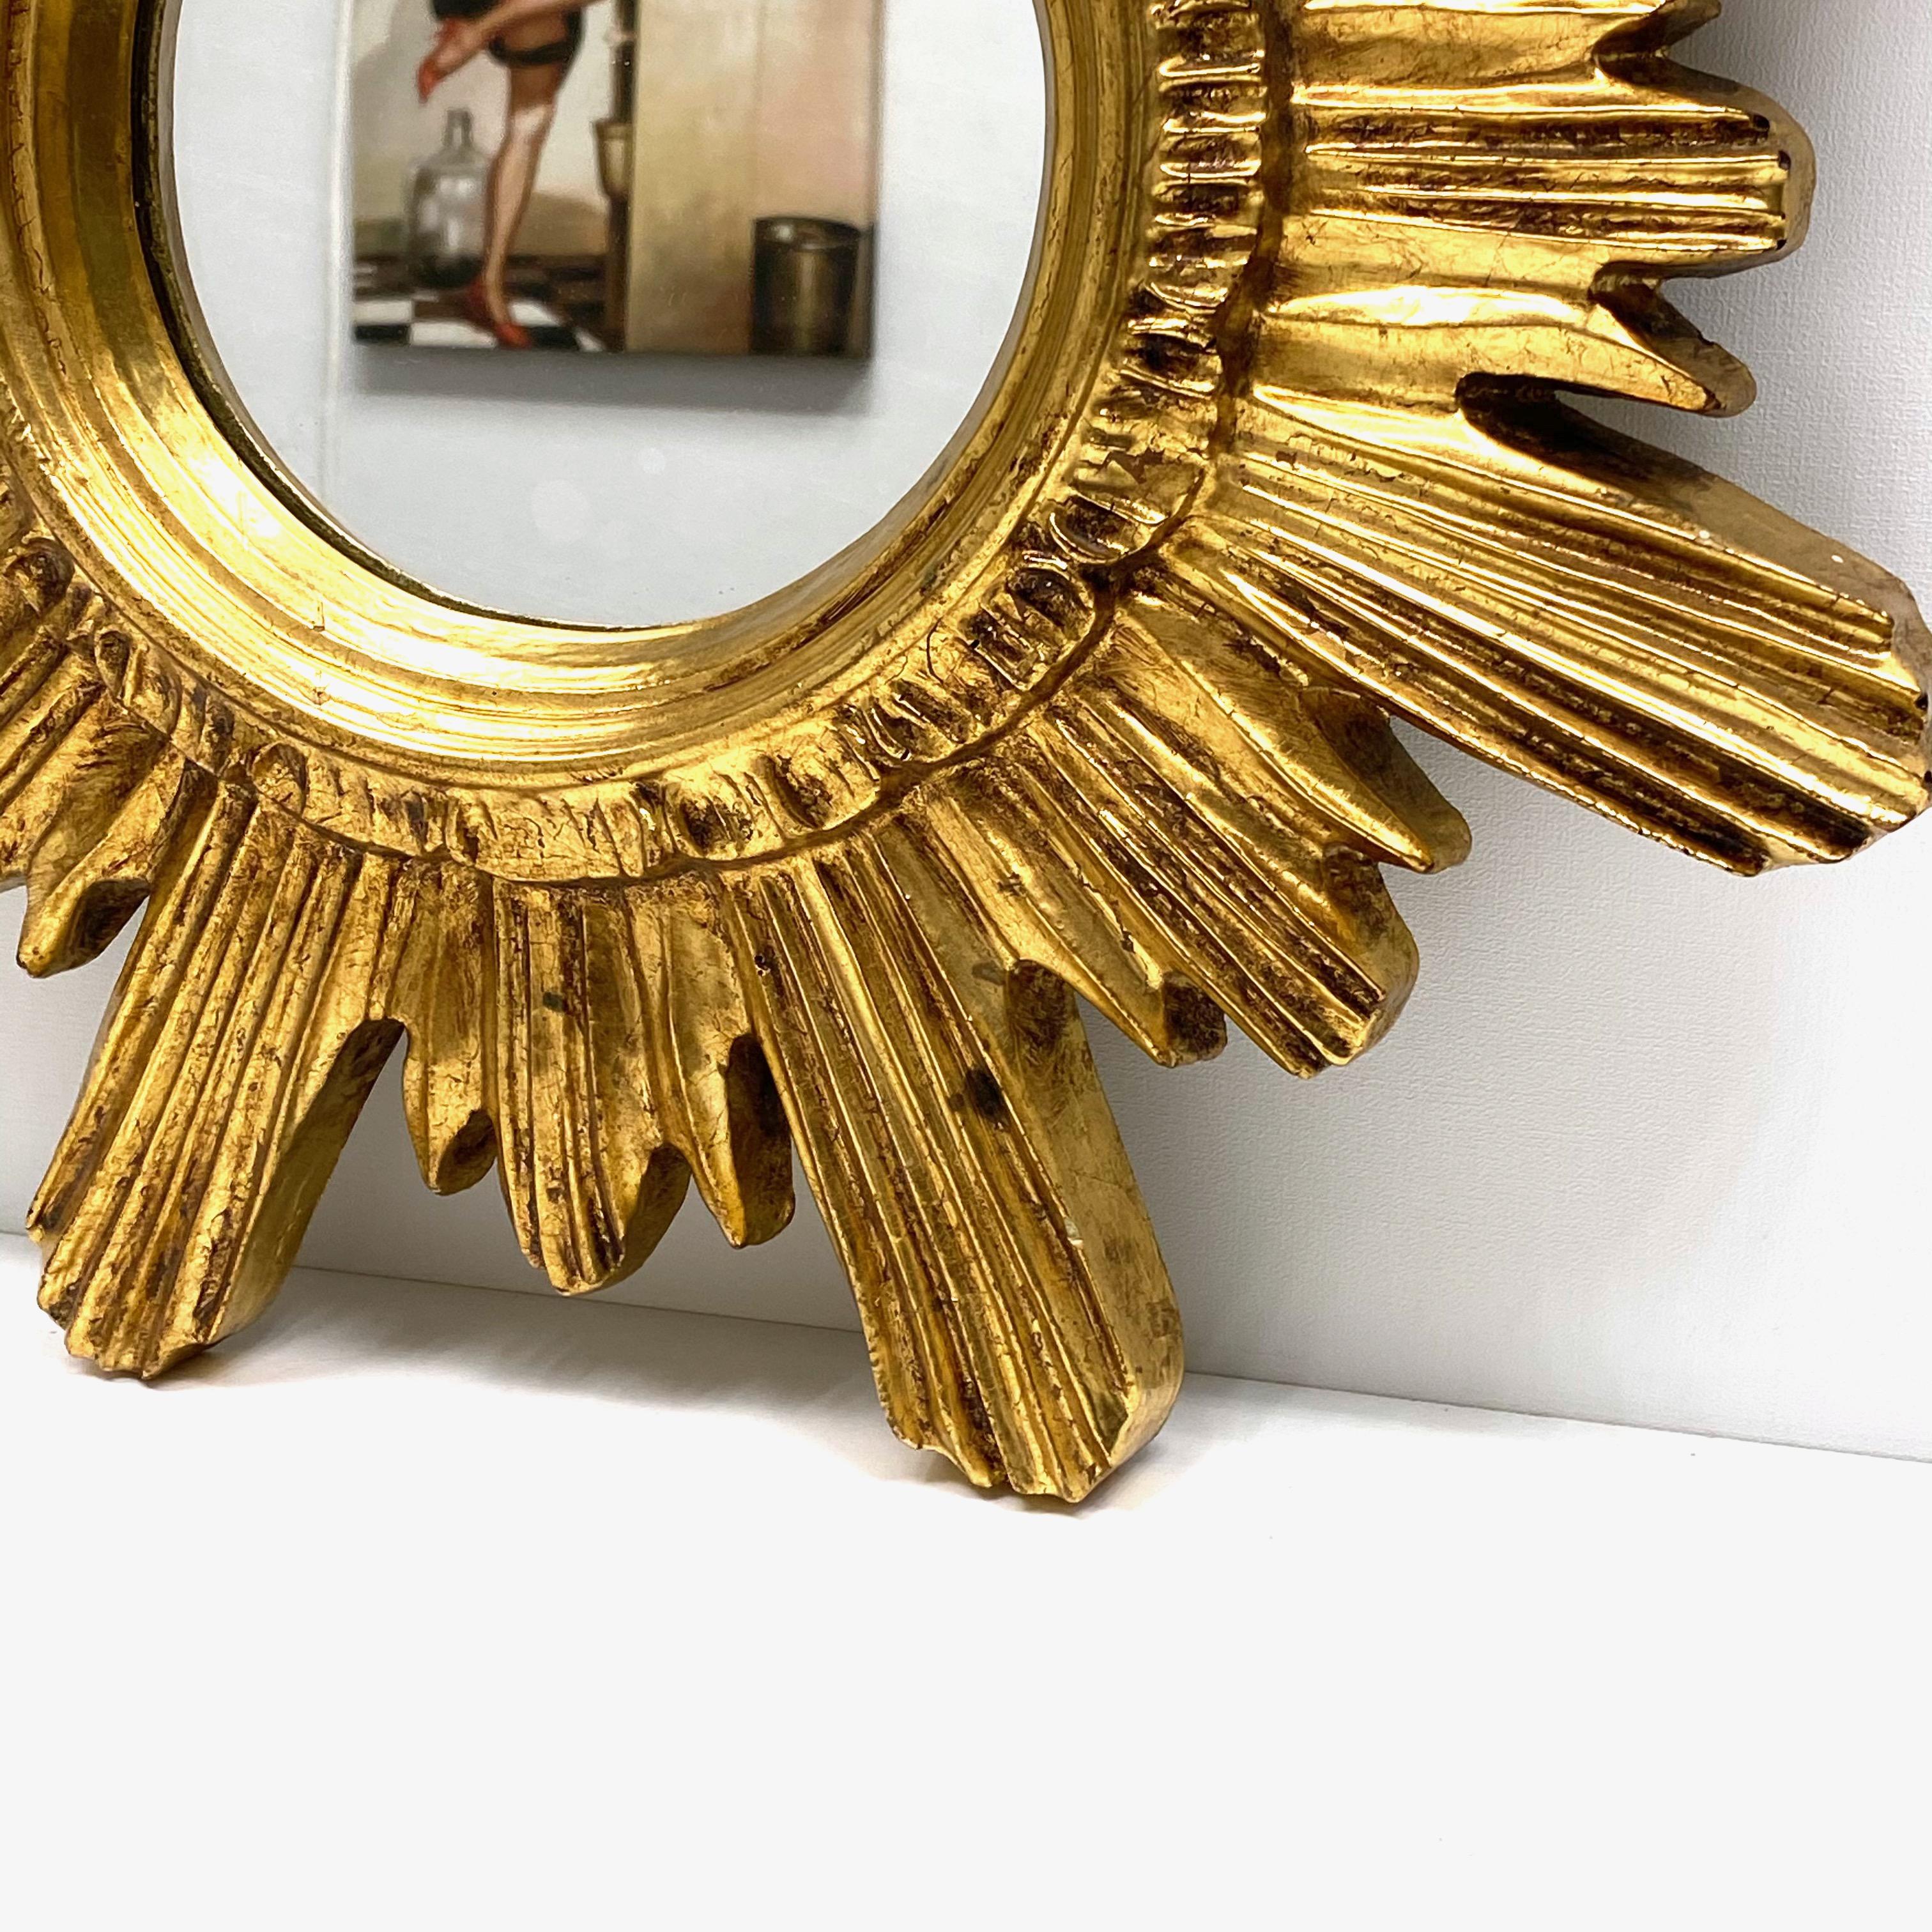 A gorgeous starburst mirror. Made of gilded polystyrene Styrofoam. No chips, no cracks, no repairs. It measures approximate 16 1/2